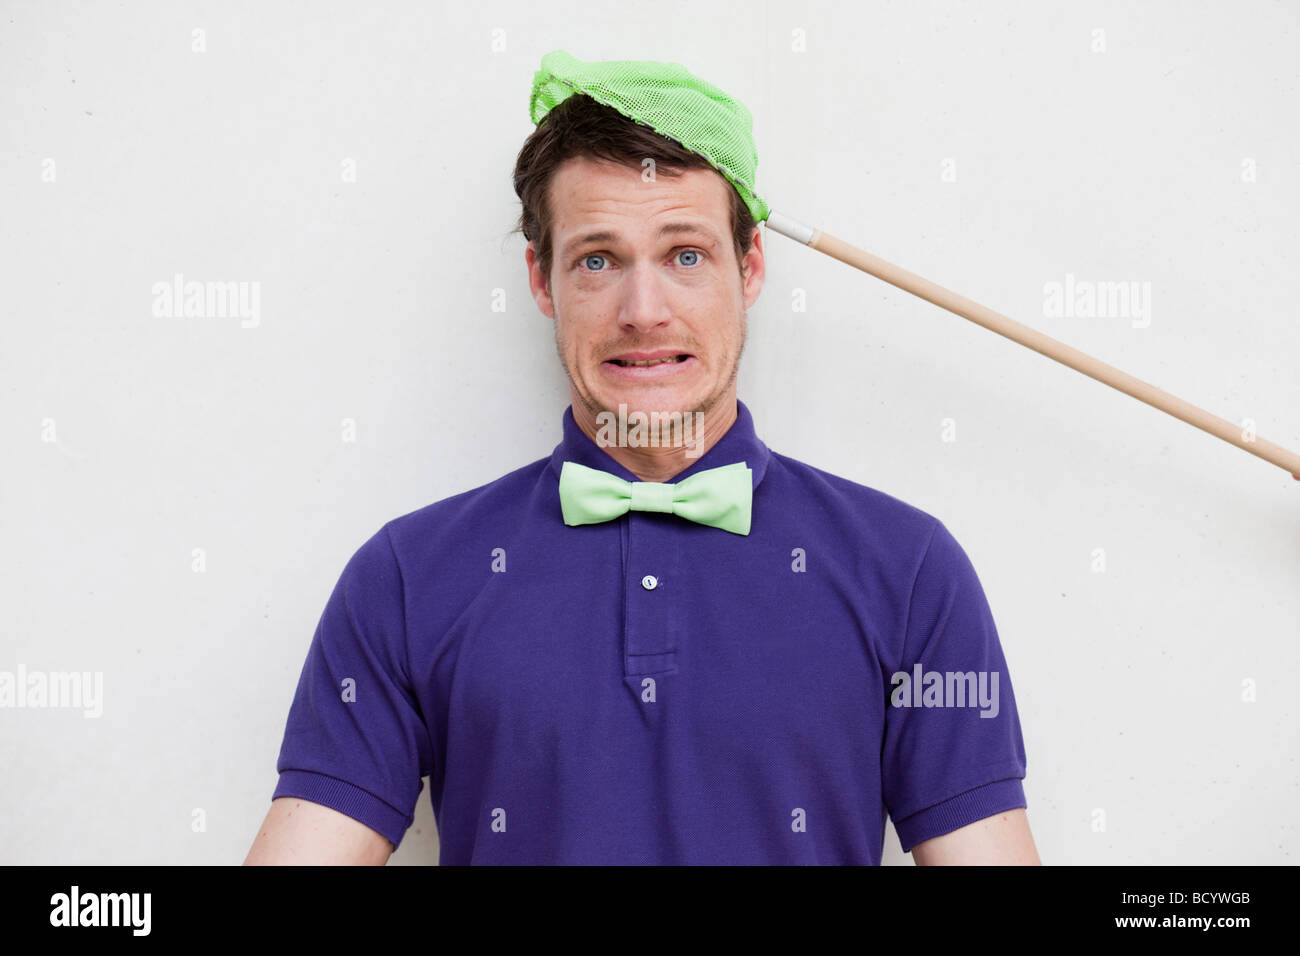 man getting caught by butterfly net Stock Photo